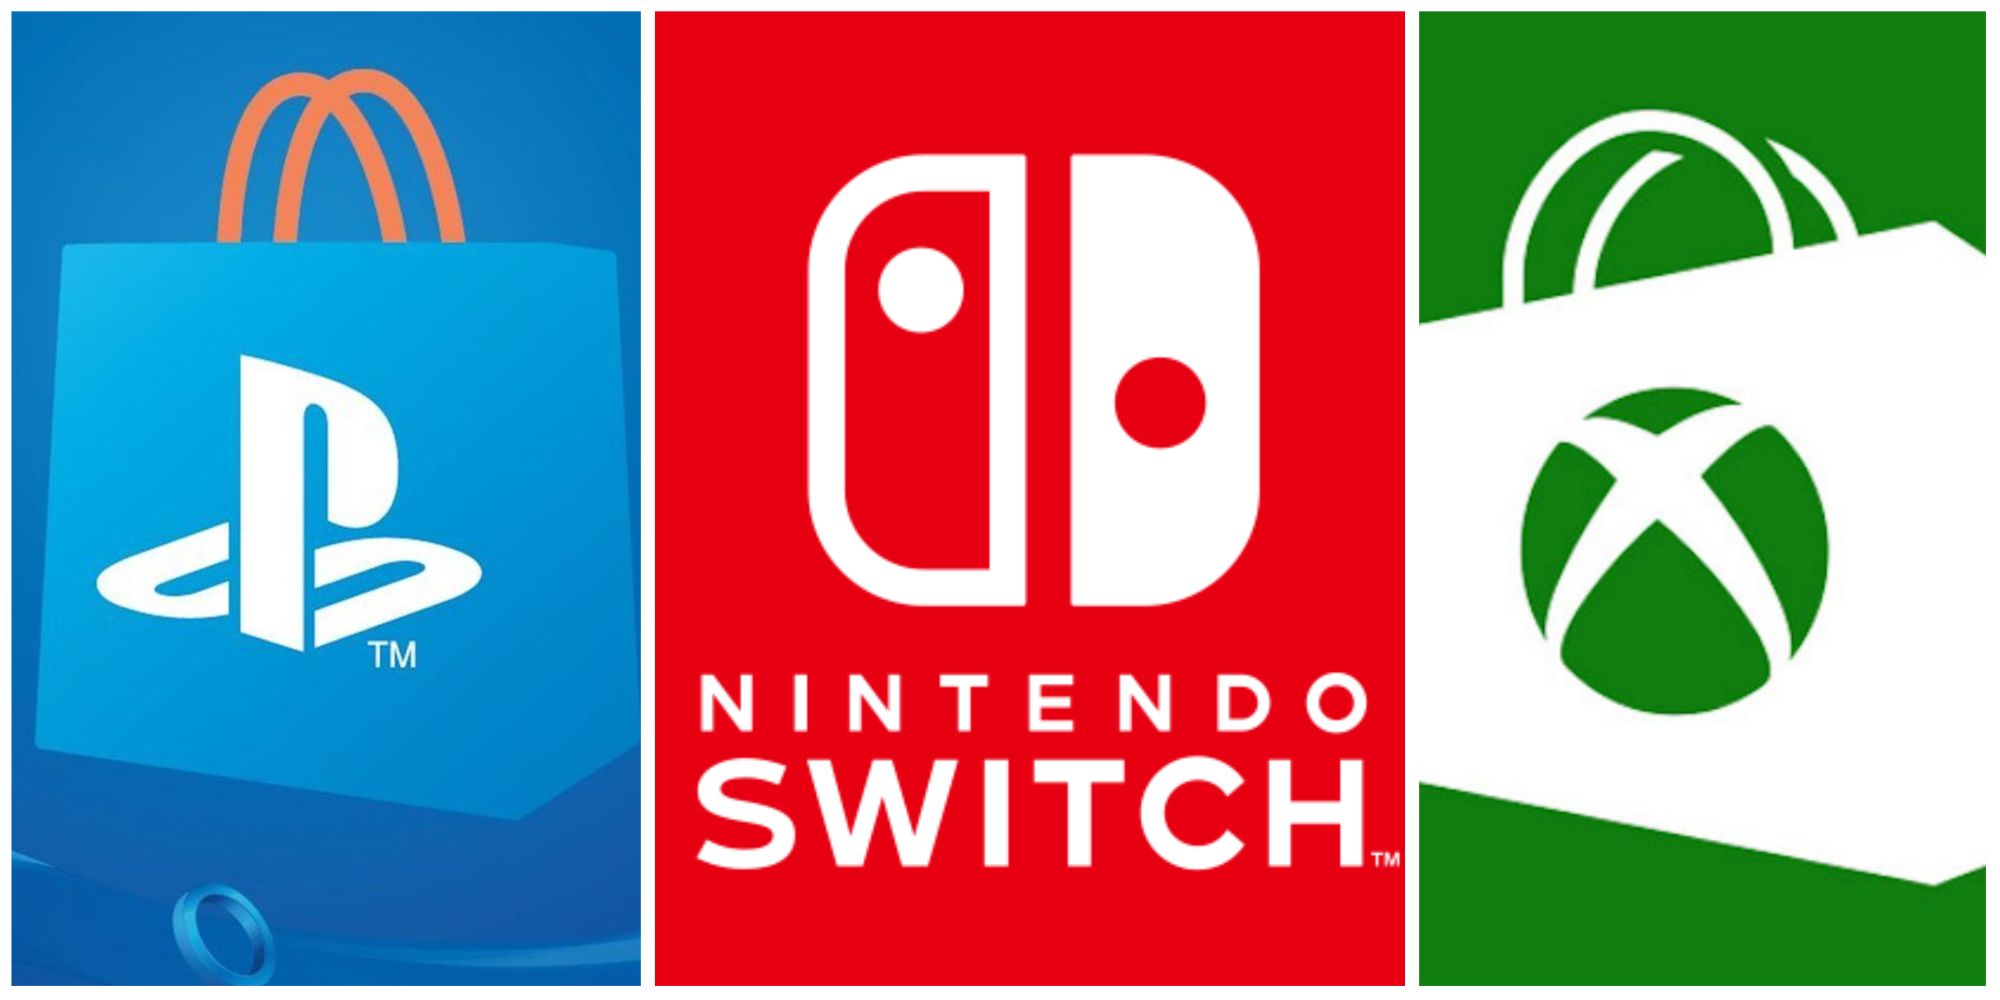 nintendo switch, playstation and xbox logos in a photo collage